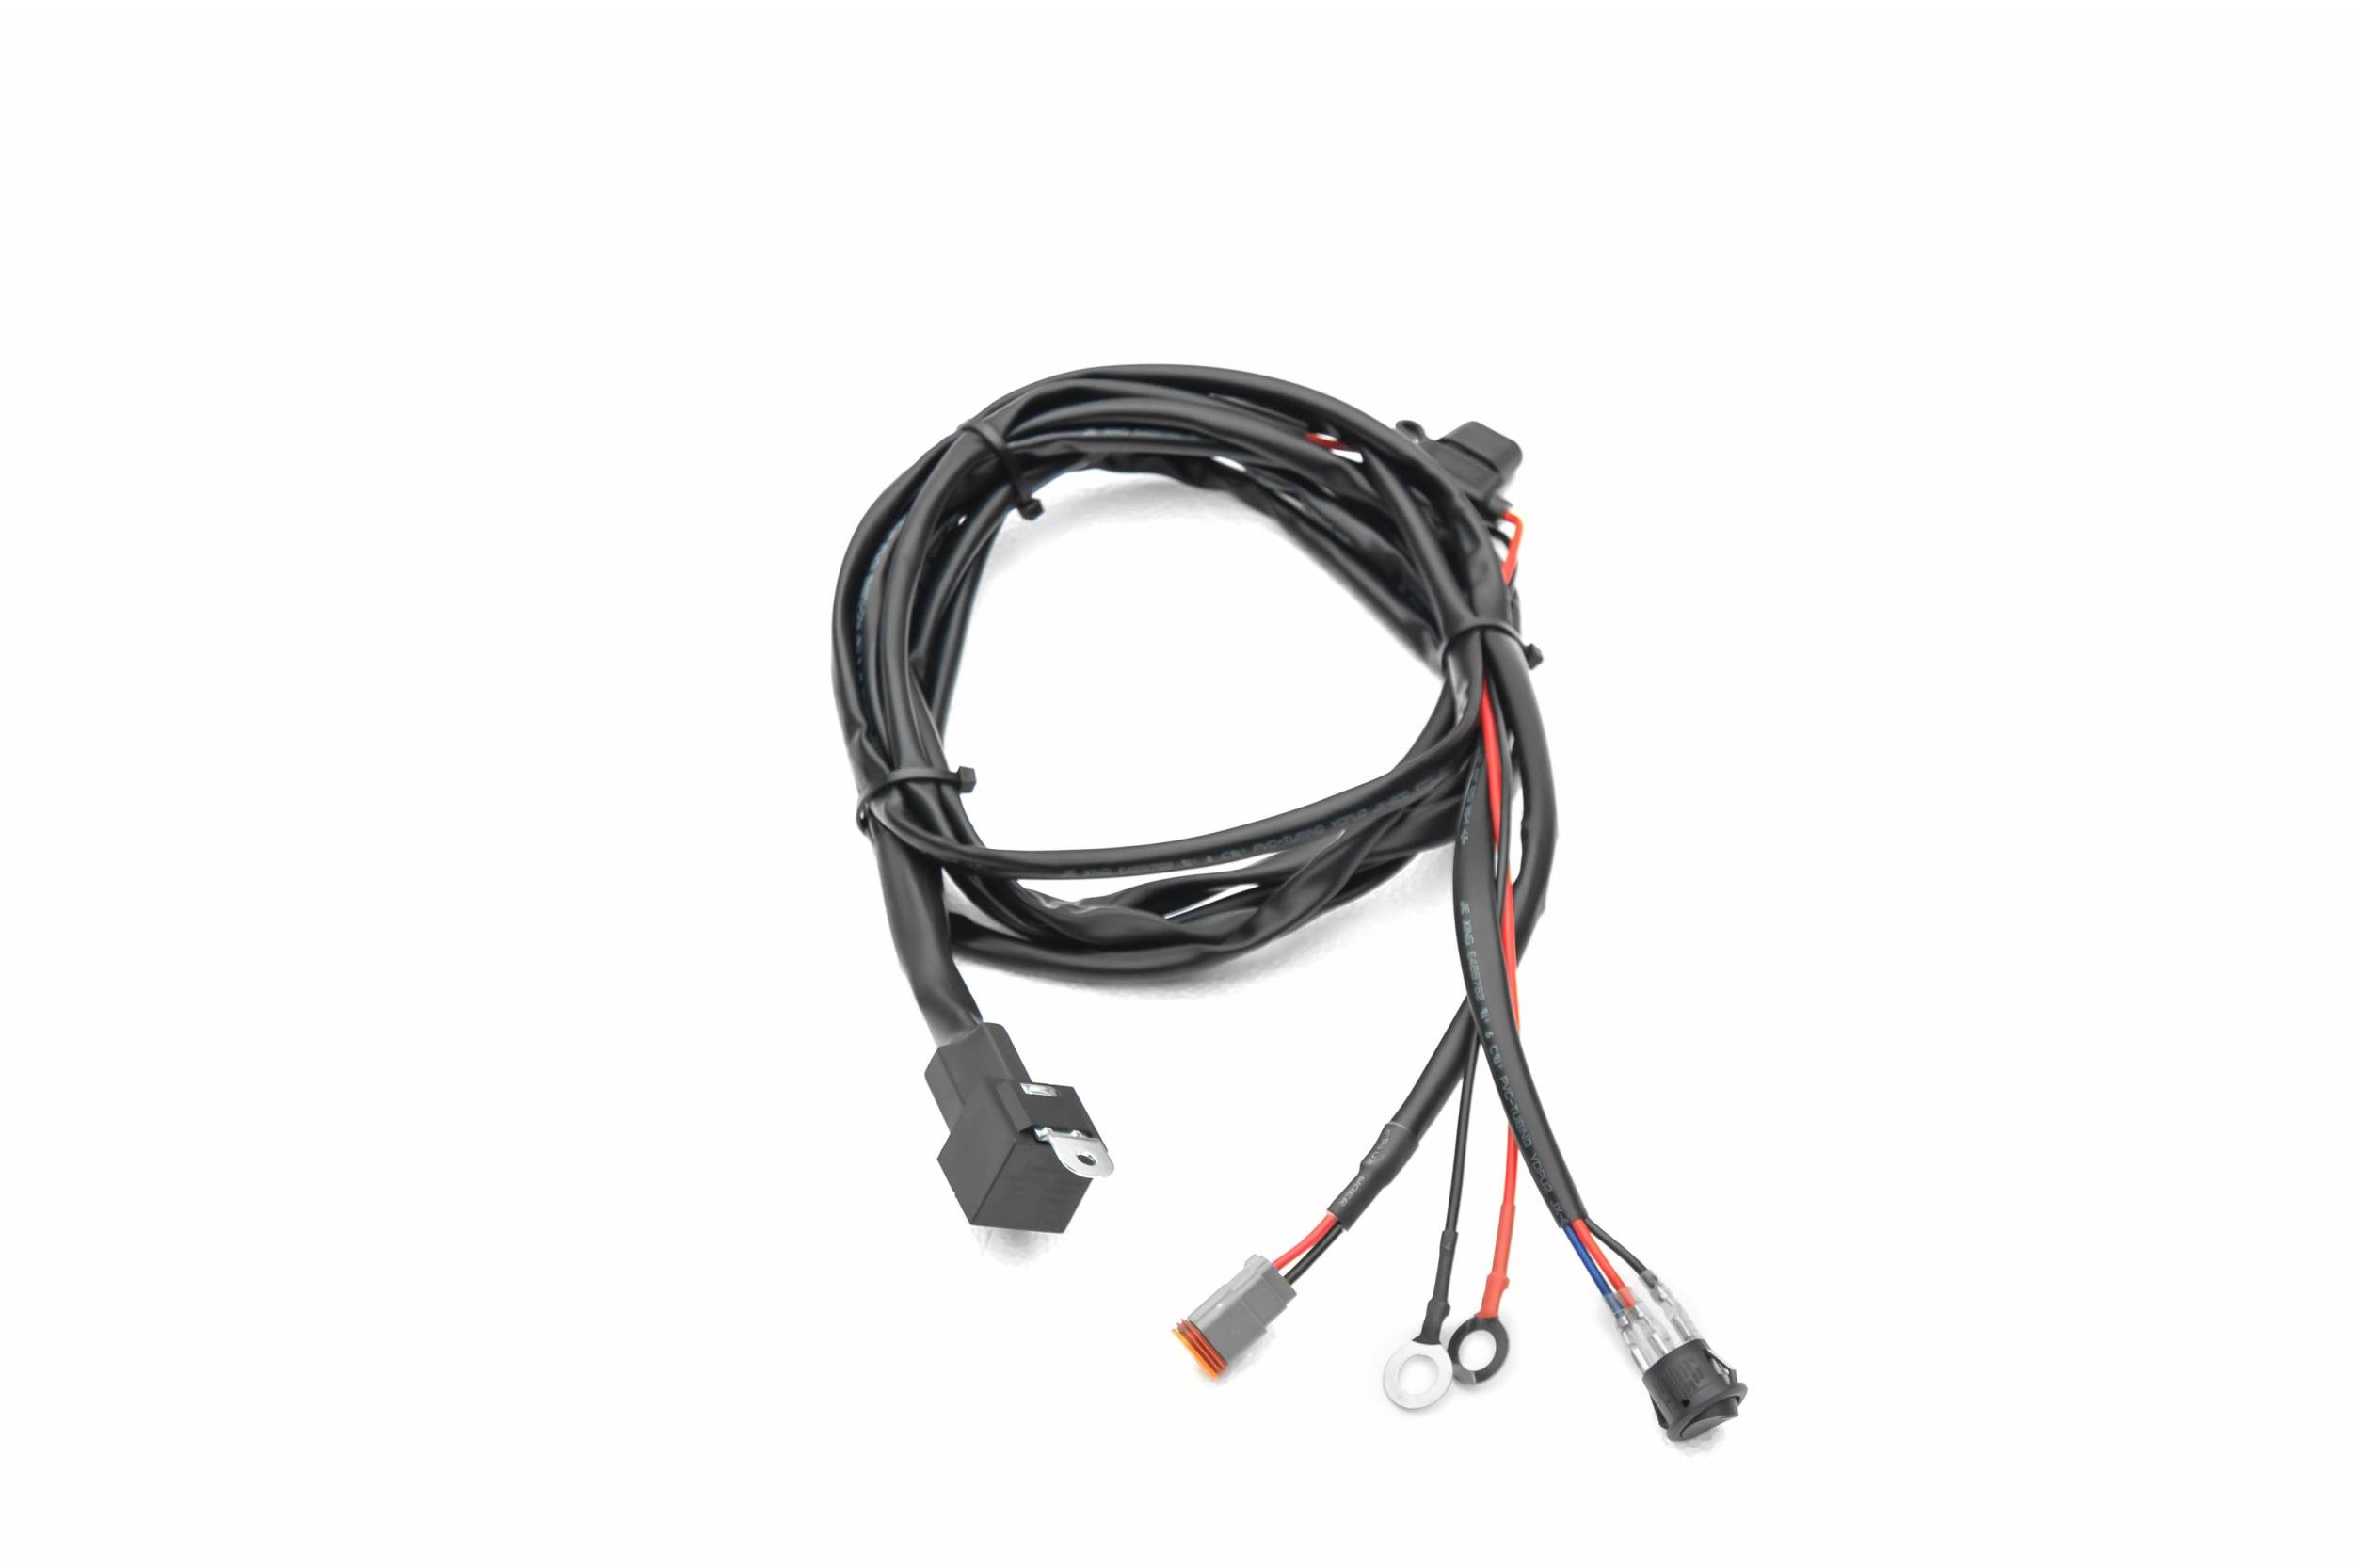 ZROADZ OFF ROAD PRODUCTS - Universal 9 FT DT Series Wiring Harness to connect 1  LED Light Bar, 200 Watt or below - Part # Z390020S-A